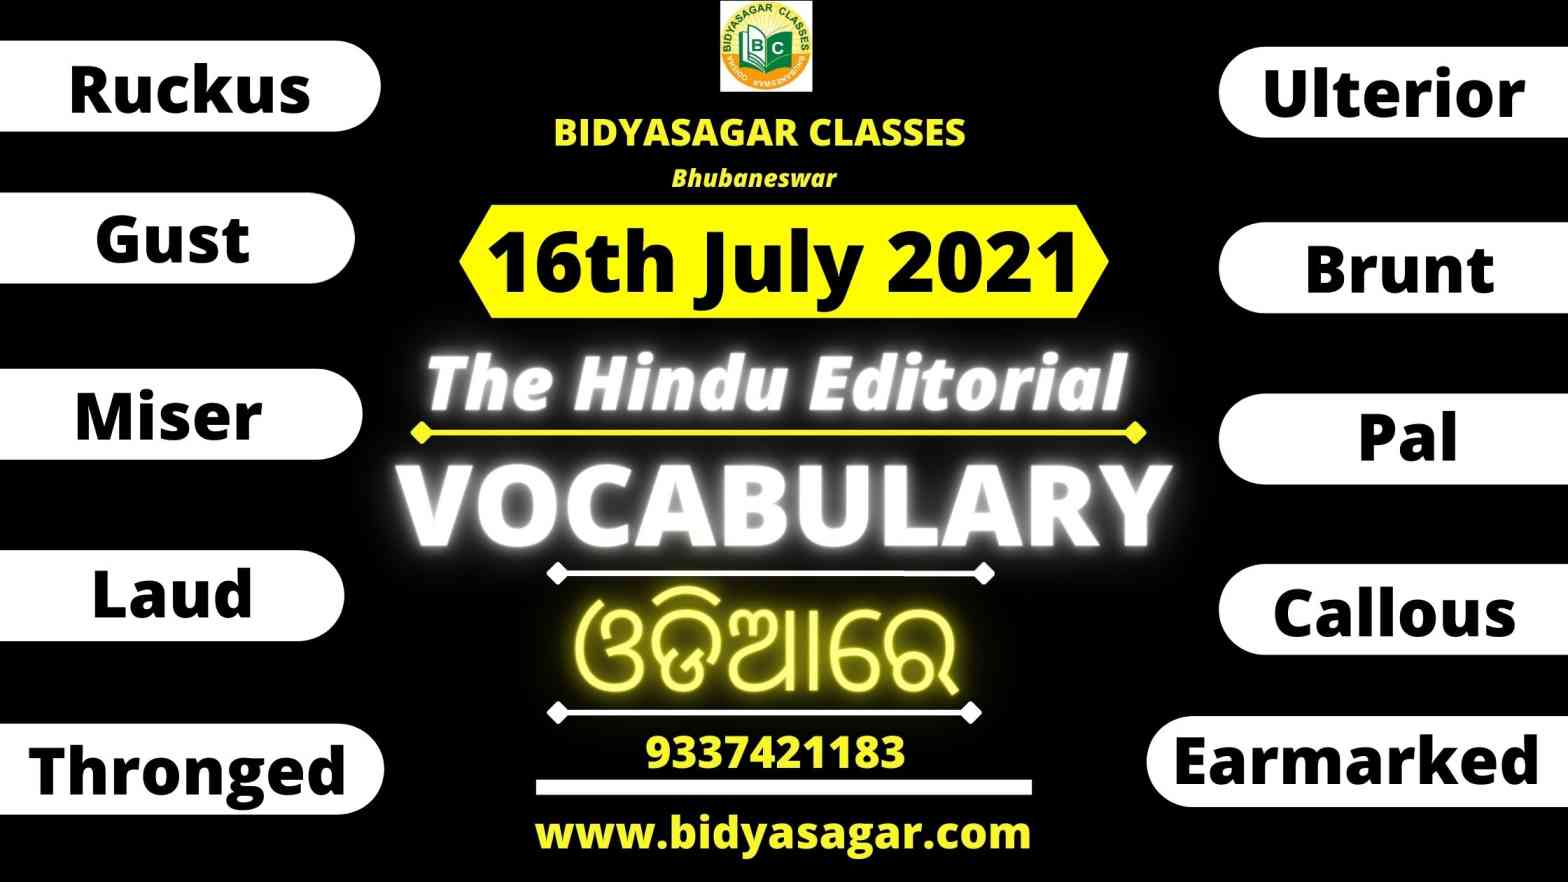 The Hindu Editorial Vocabulary of 16th July 2021